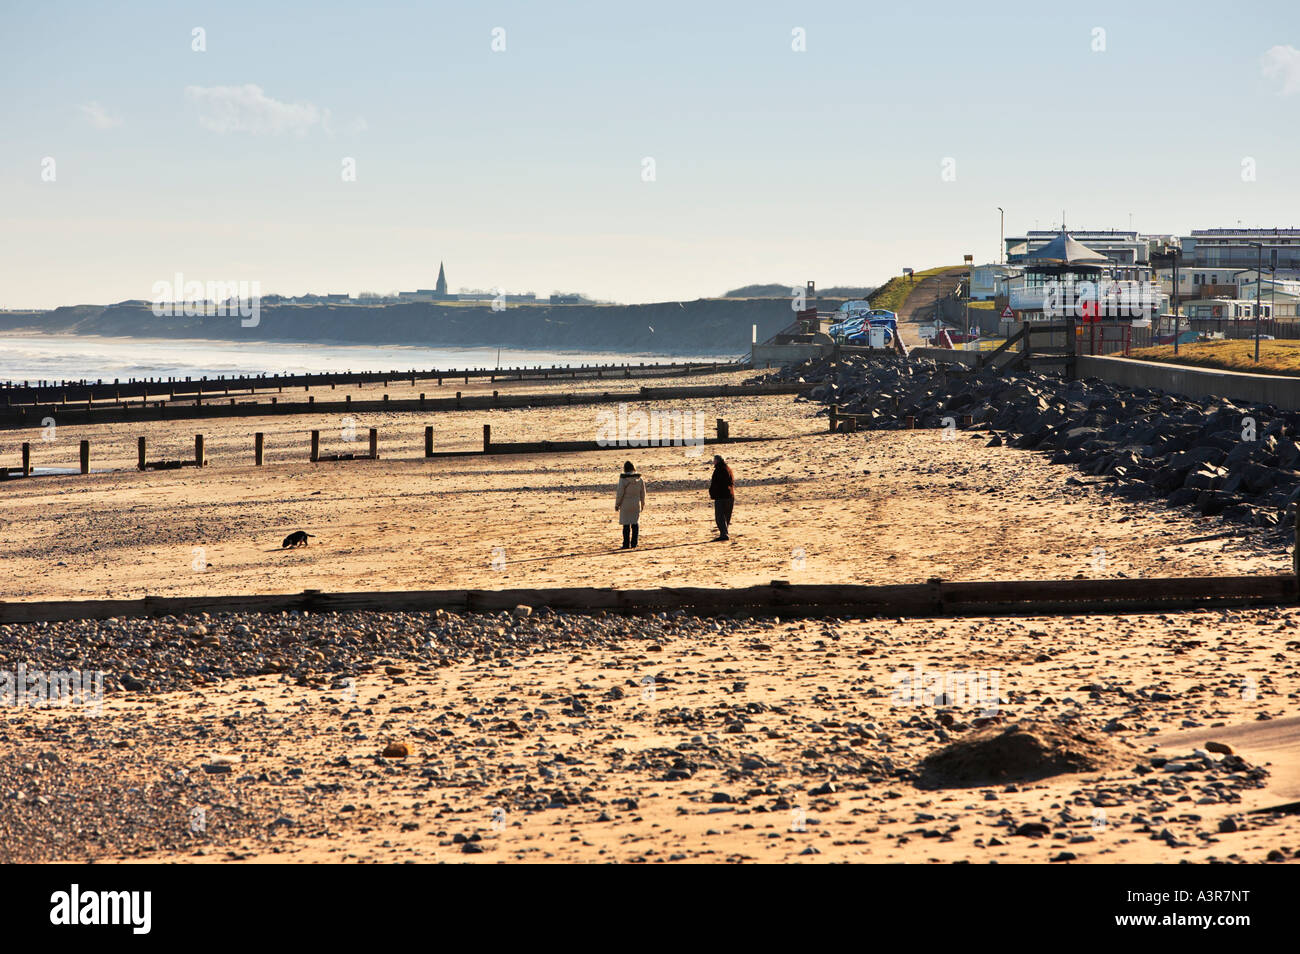 Couple walking a dog on beach at Hornsea East Yorkshire UK Stock Photo